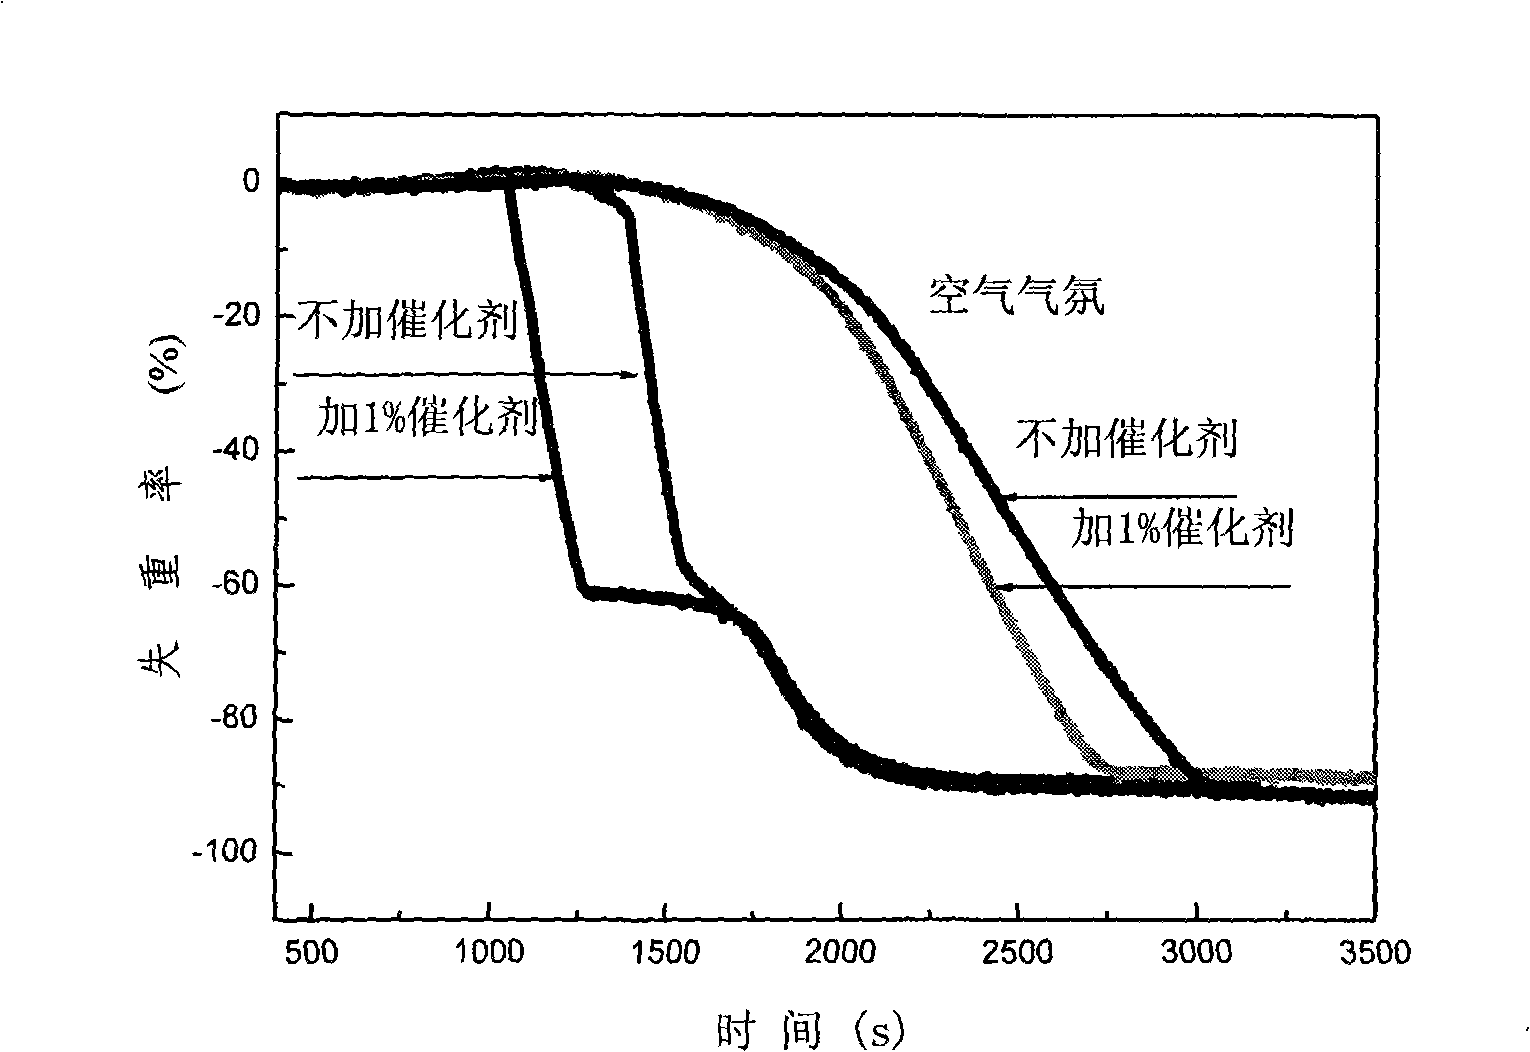 Method for producing and using calcium based rare earth composite catalyst for accelerating pulverized coal burning